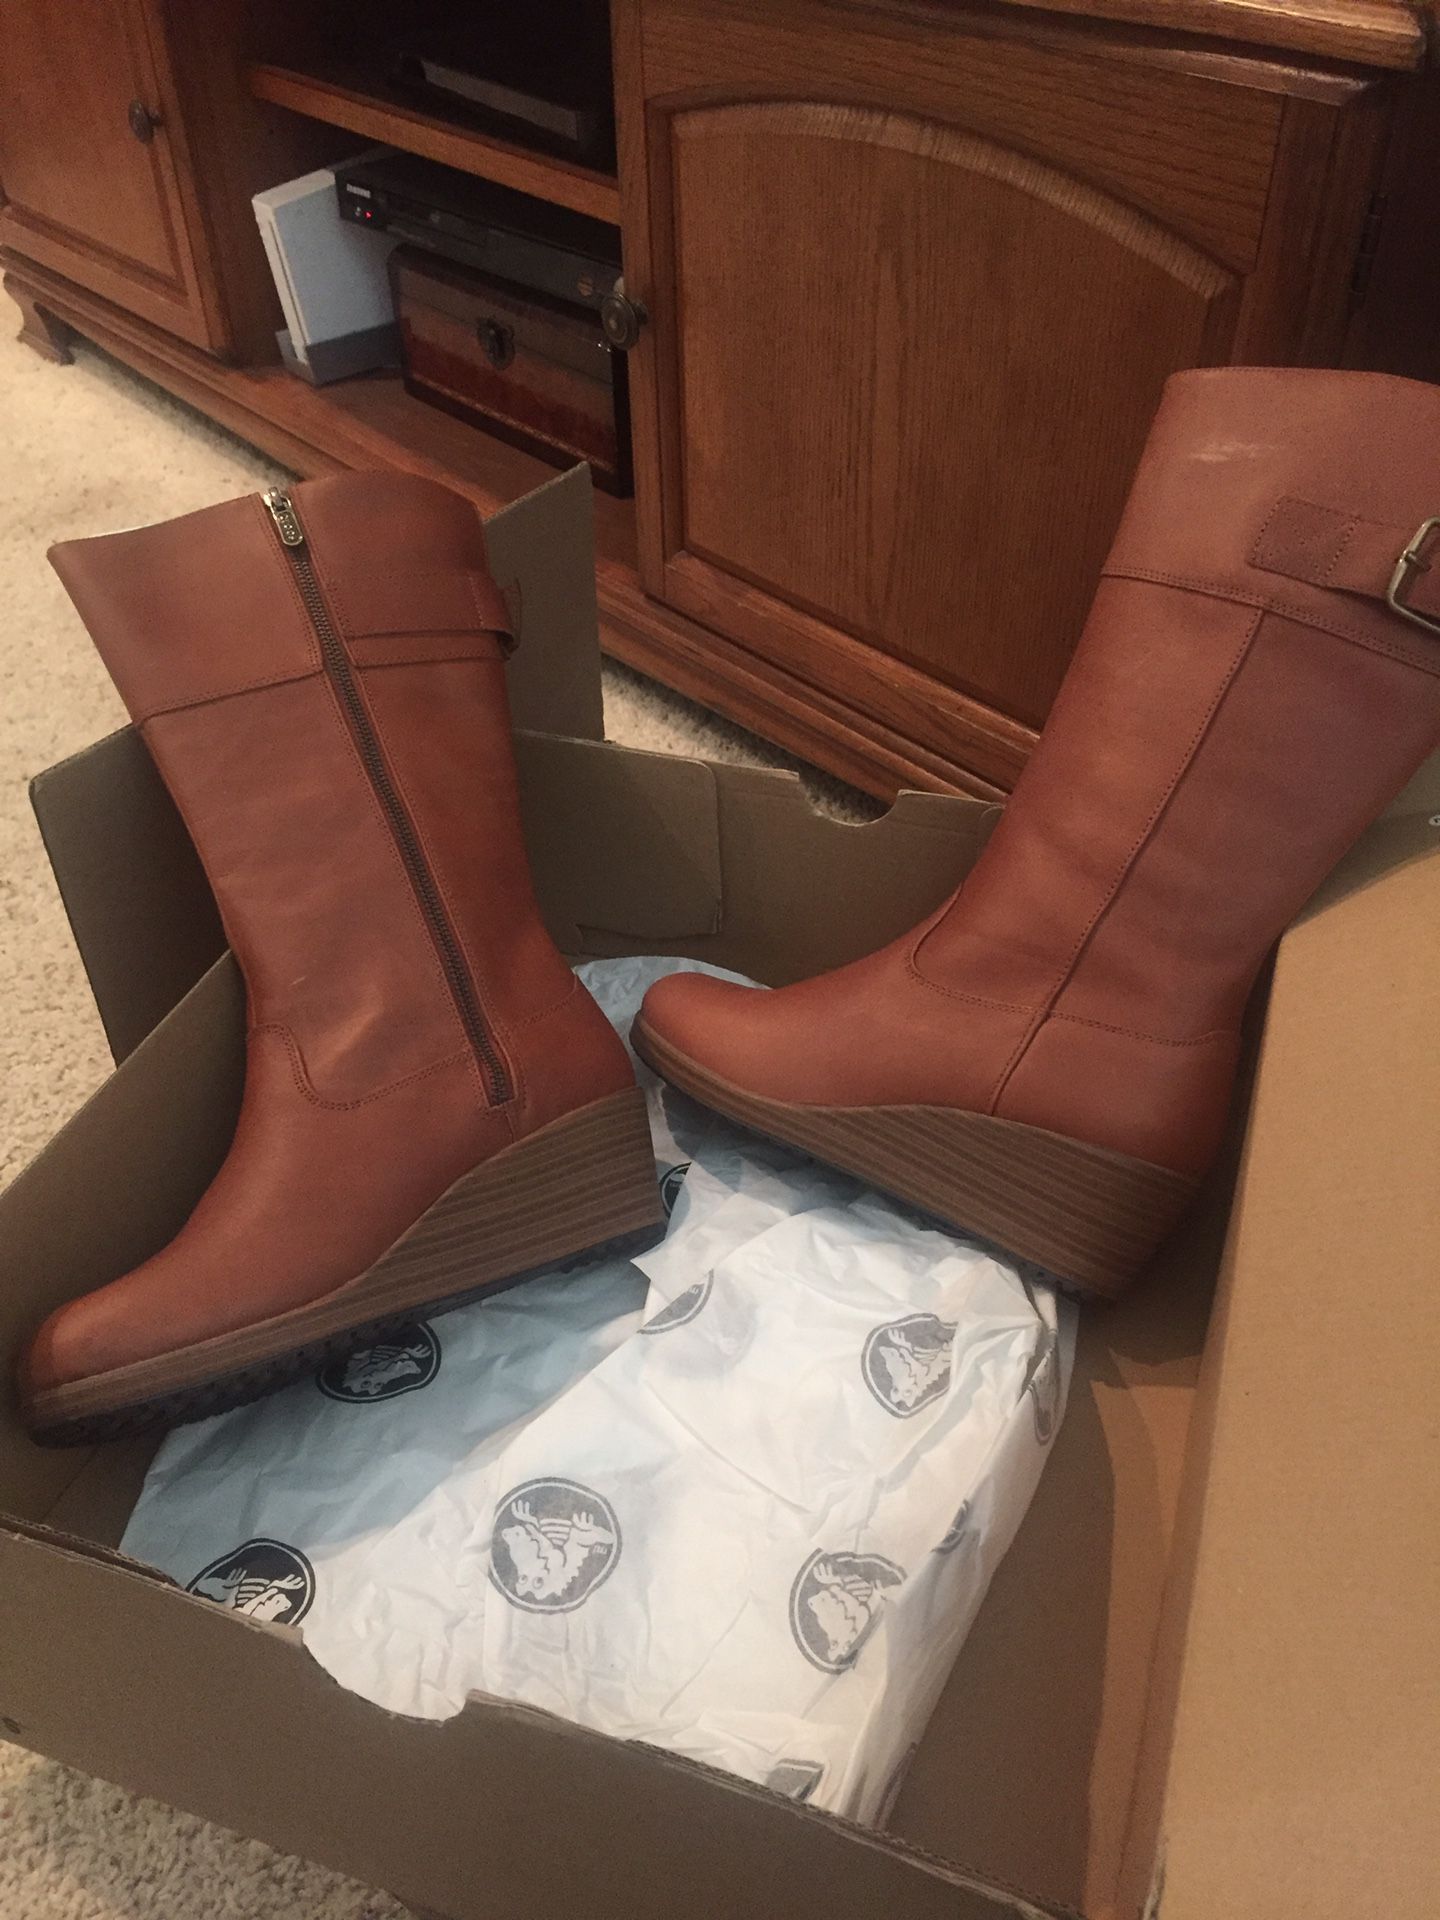 Brand new, never worn, still in box, very cute Crocs boots. Size 7 1/2.